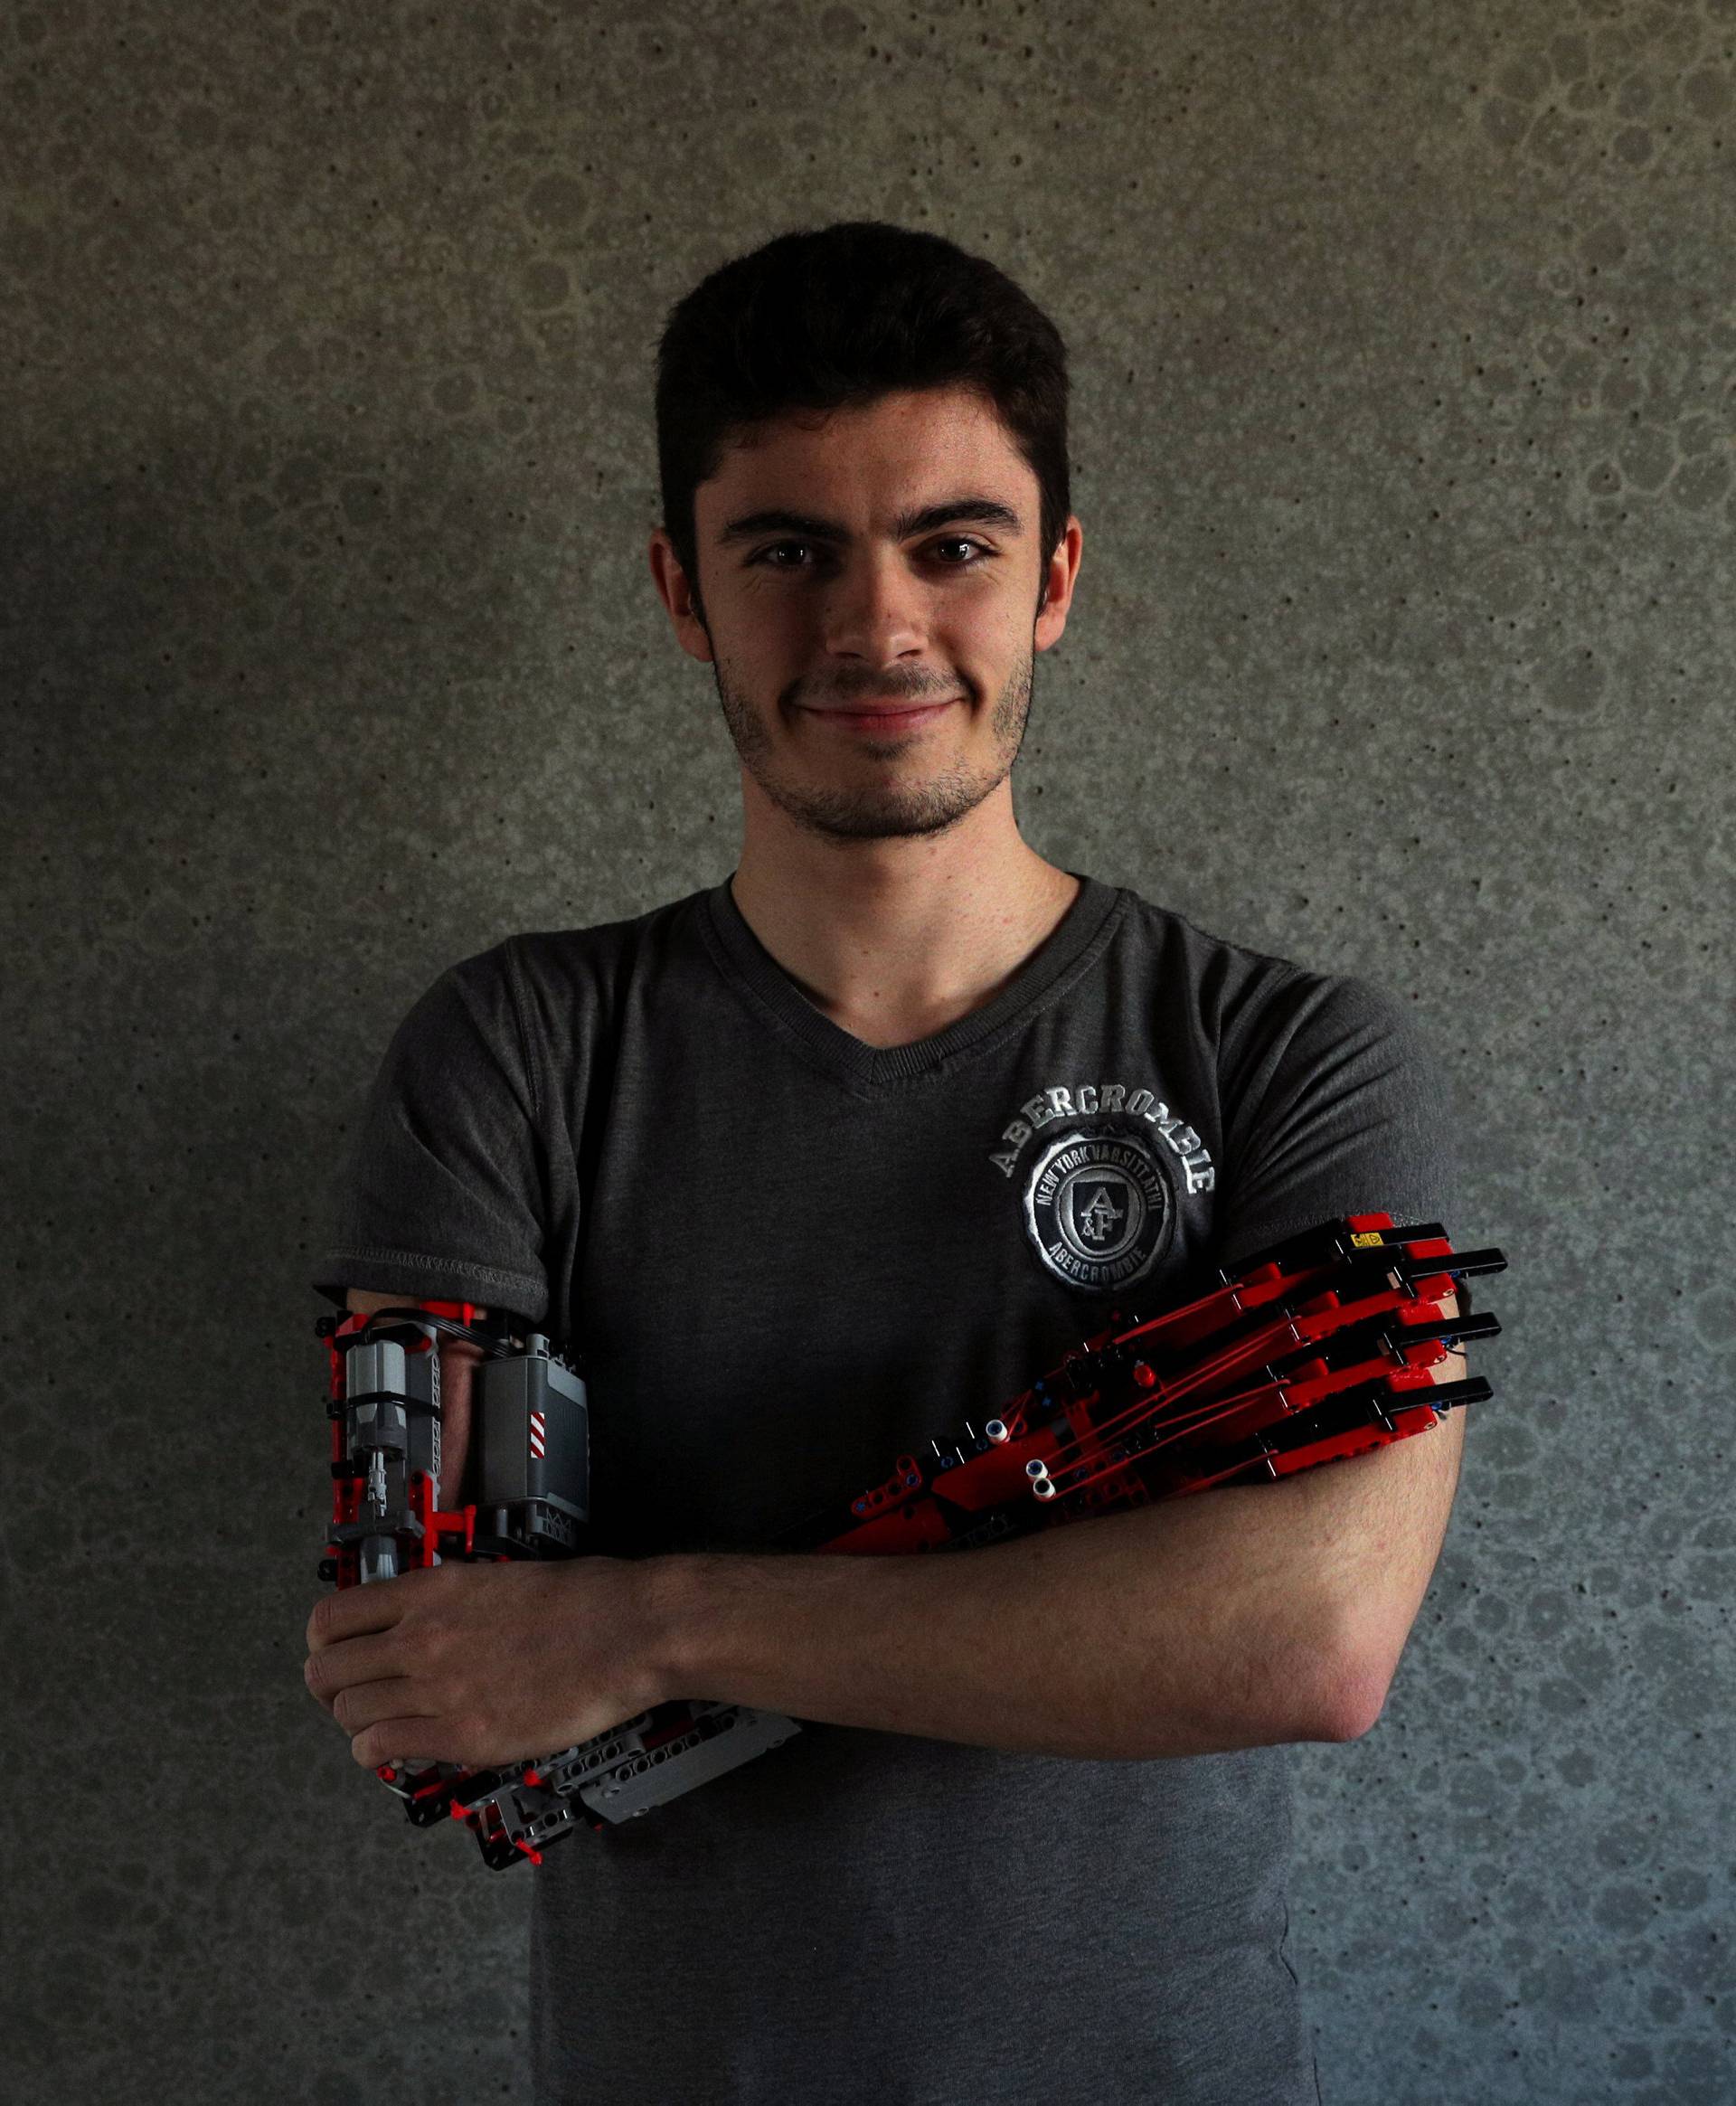 David Aguliar poses with his prosthetic arm built with Lego pieces during an interview with Reuters in Sant Cugat del Valles